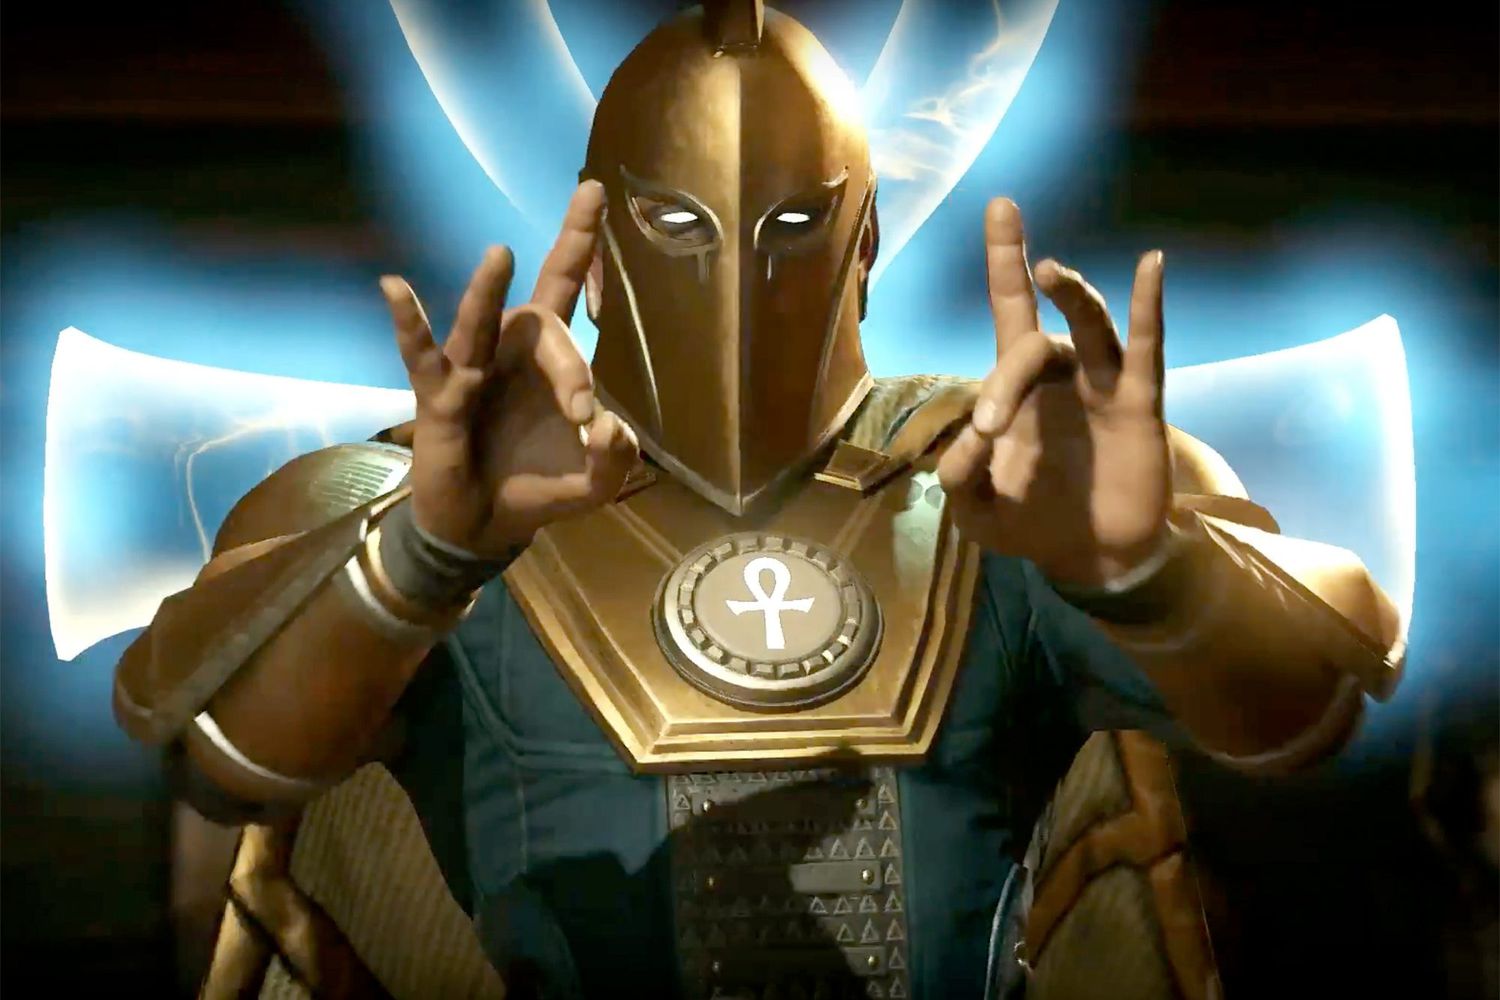 Doctor fate